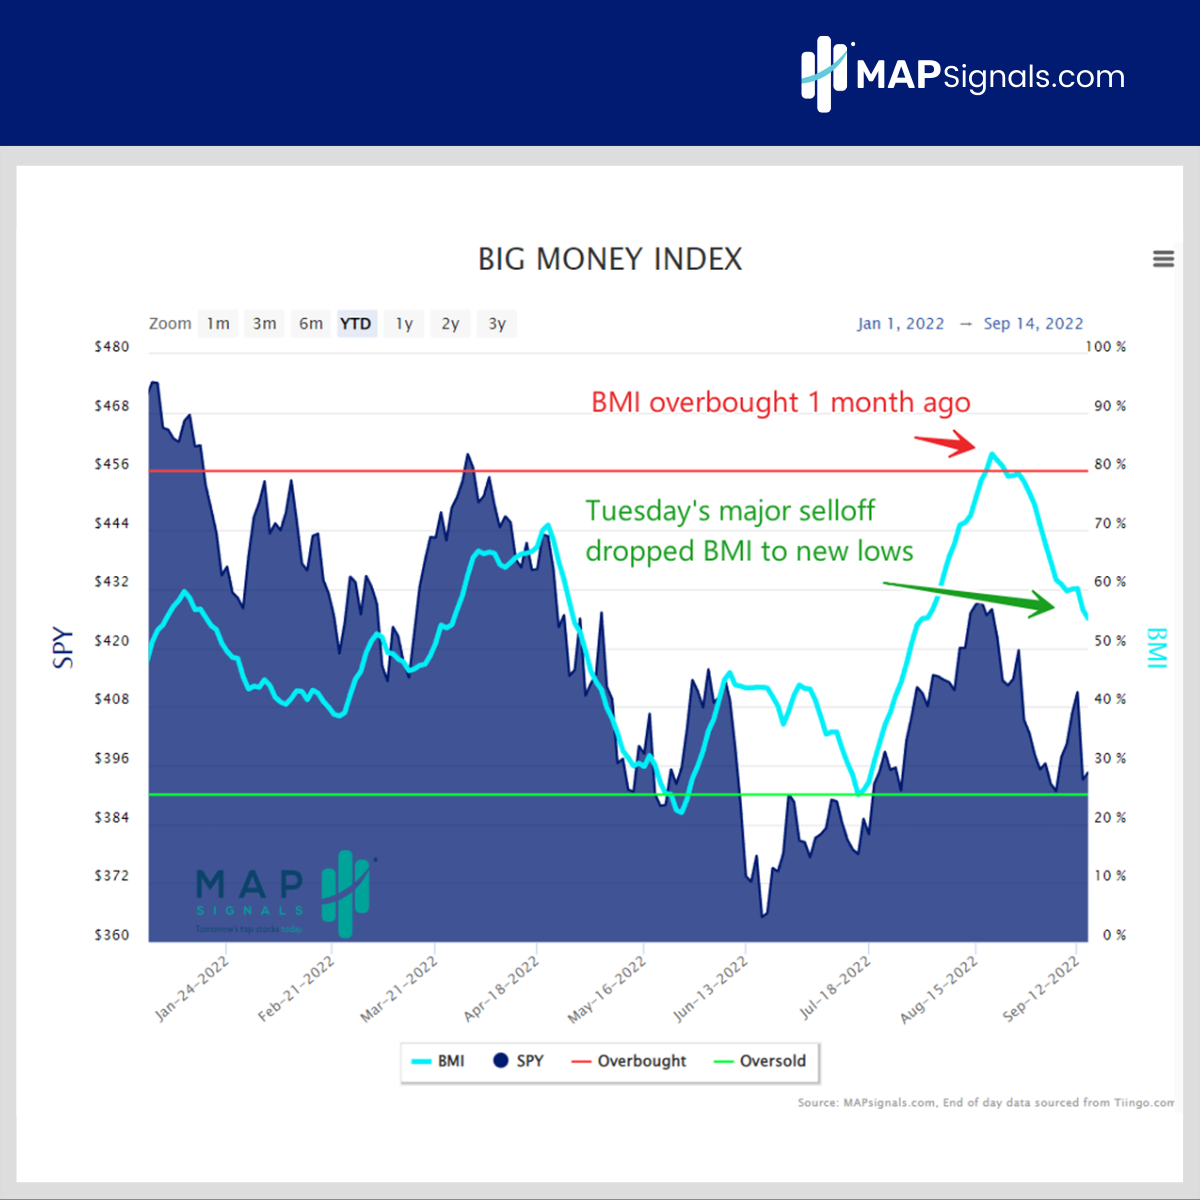 Tuesday's major selloff dropped BMI to new lows | Big Money Index